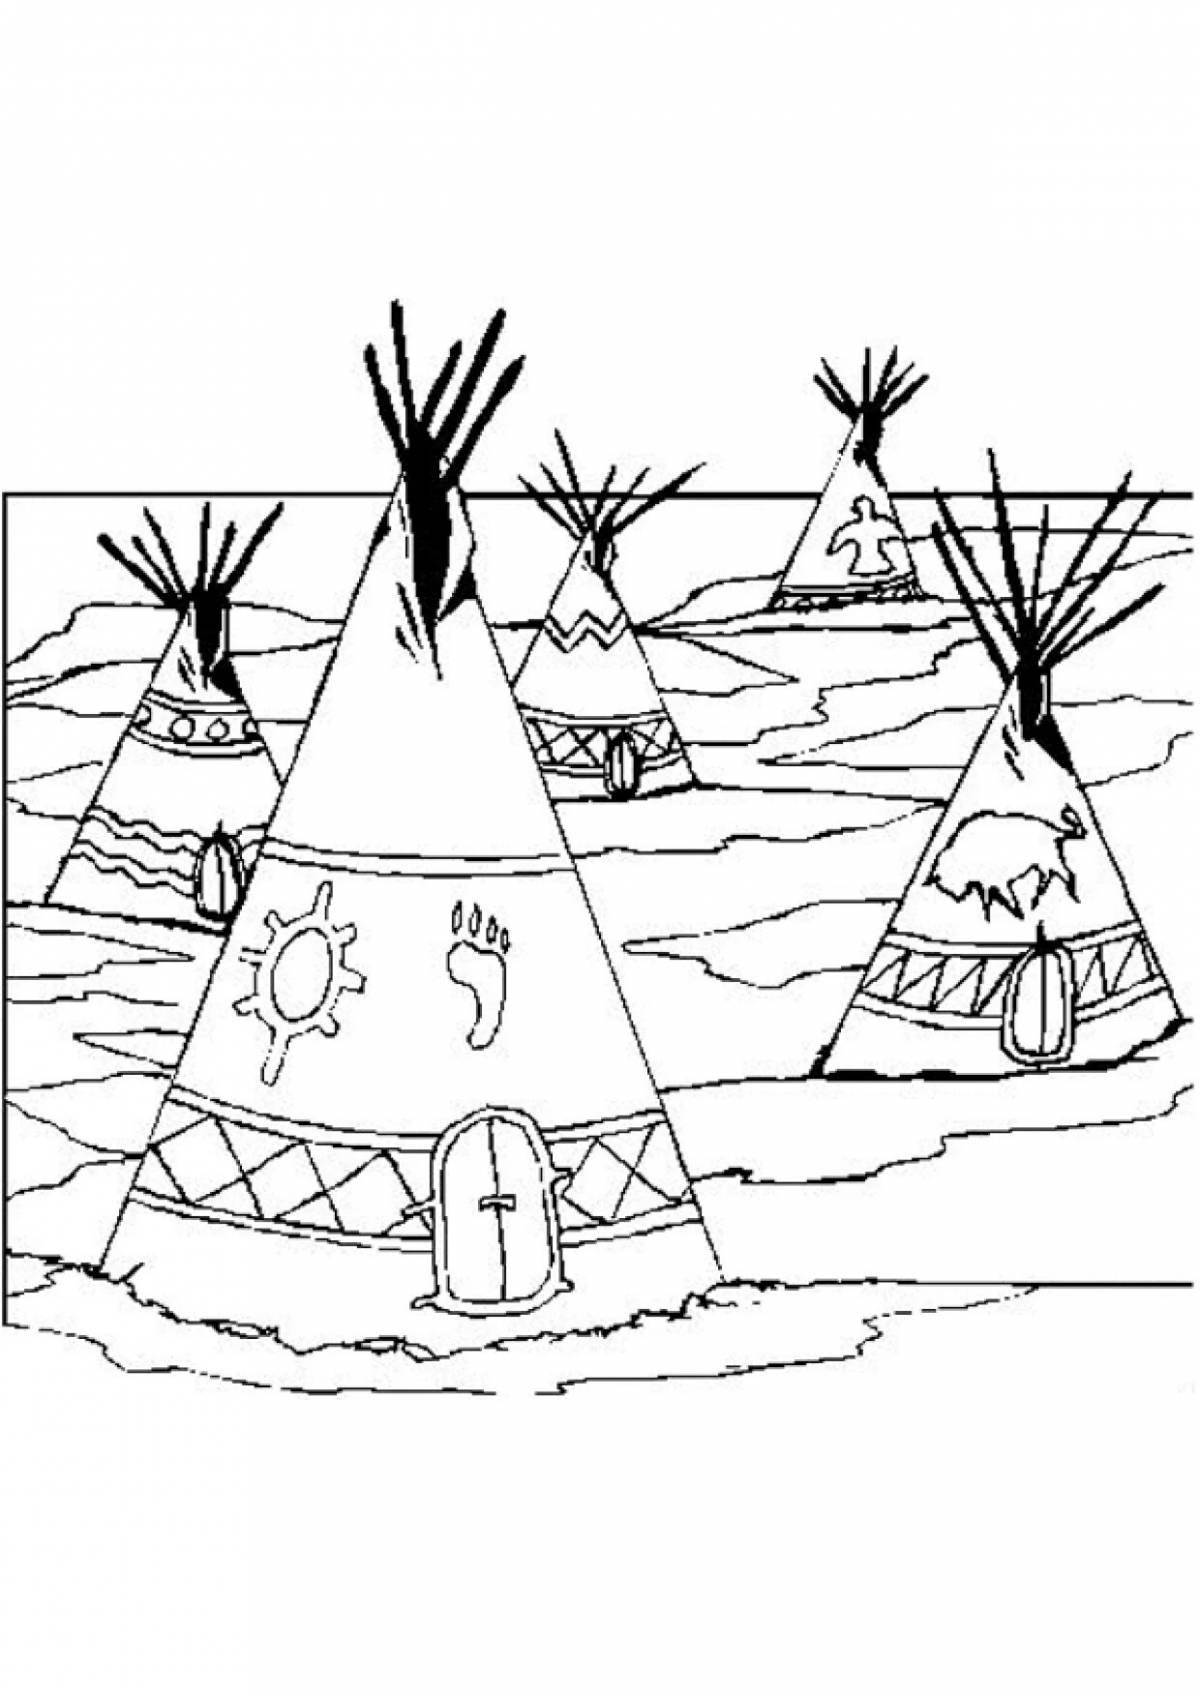 Amazing coloring book for children of the north